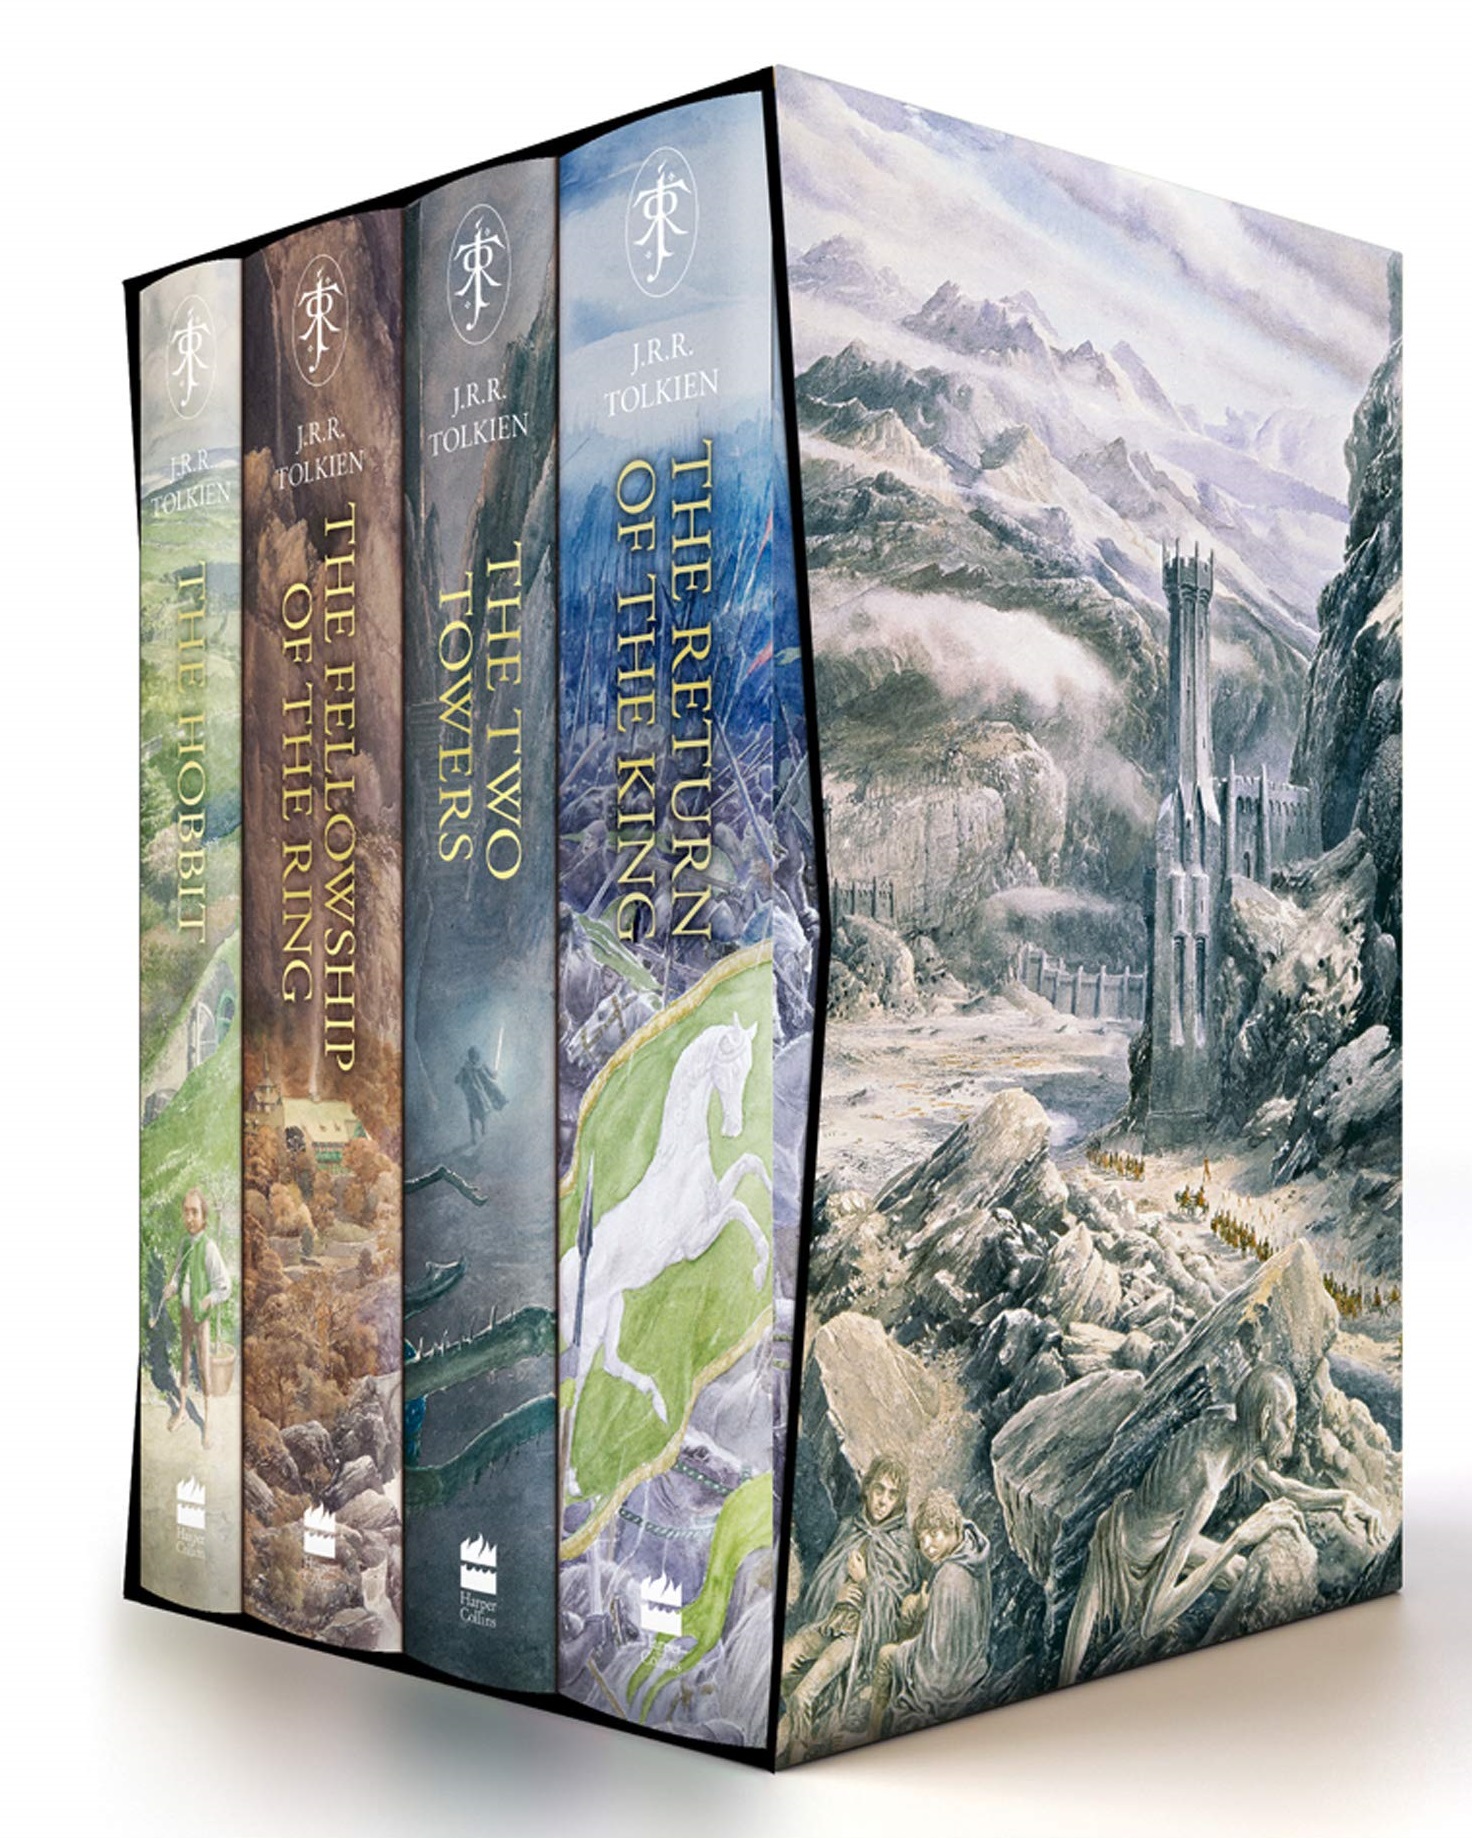 The Hobbit &amp; The Lord of the Rings Boxed Set